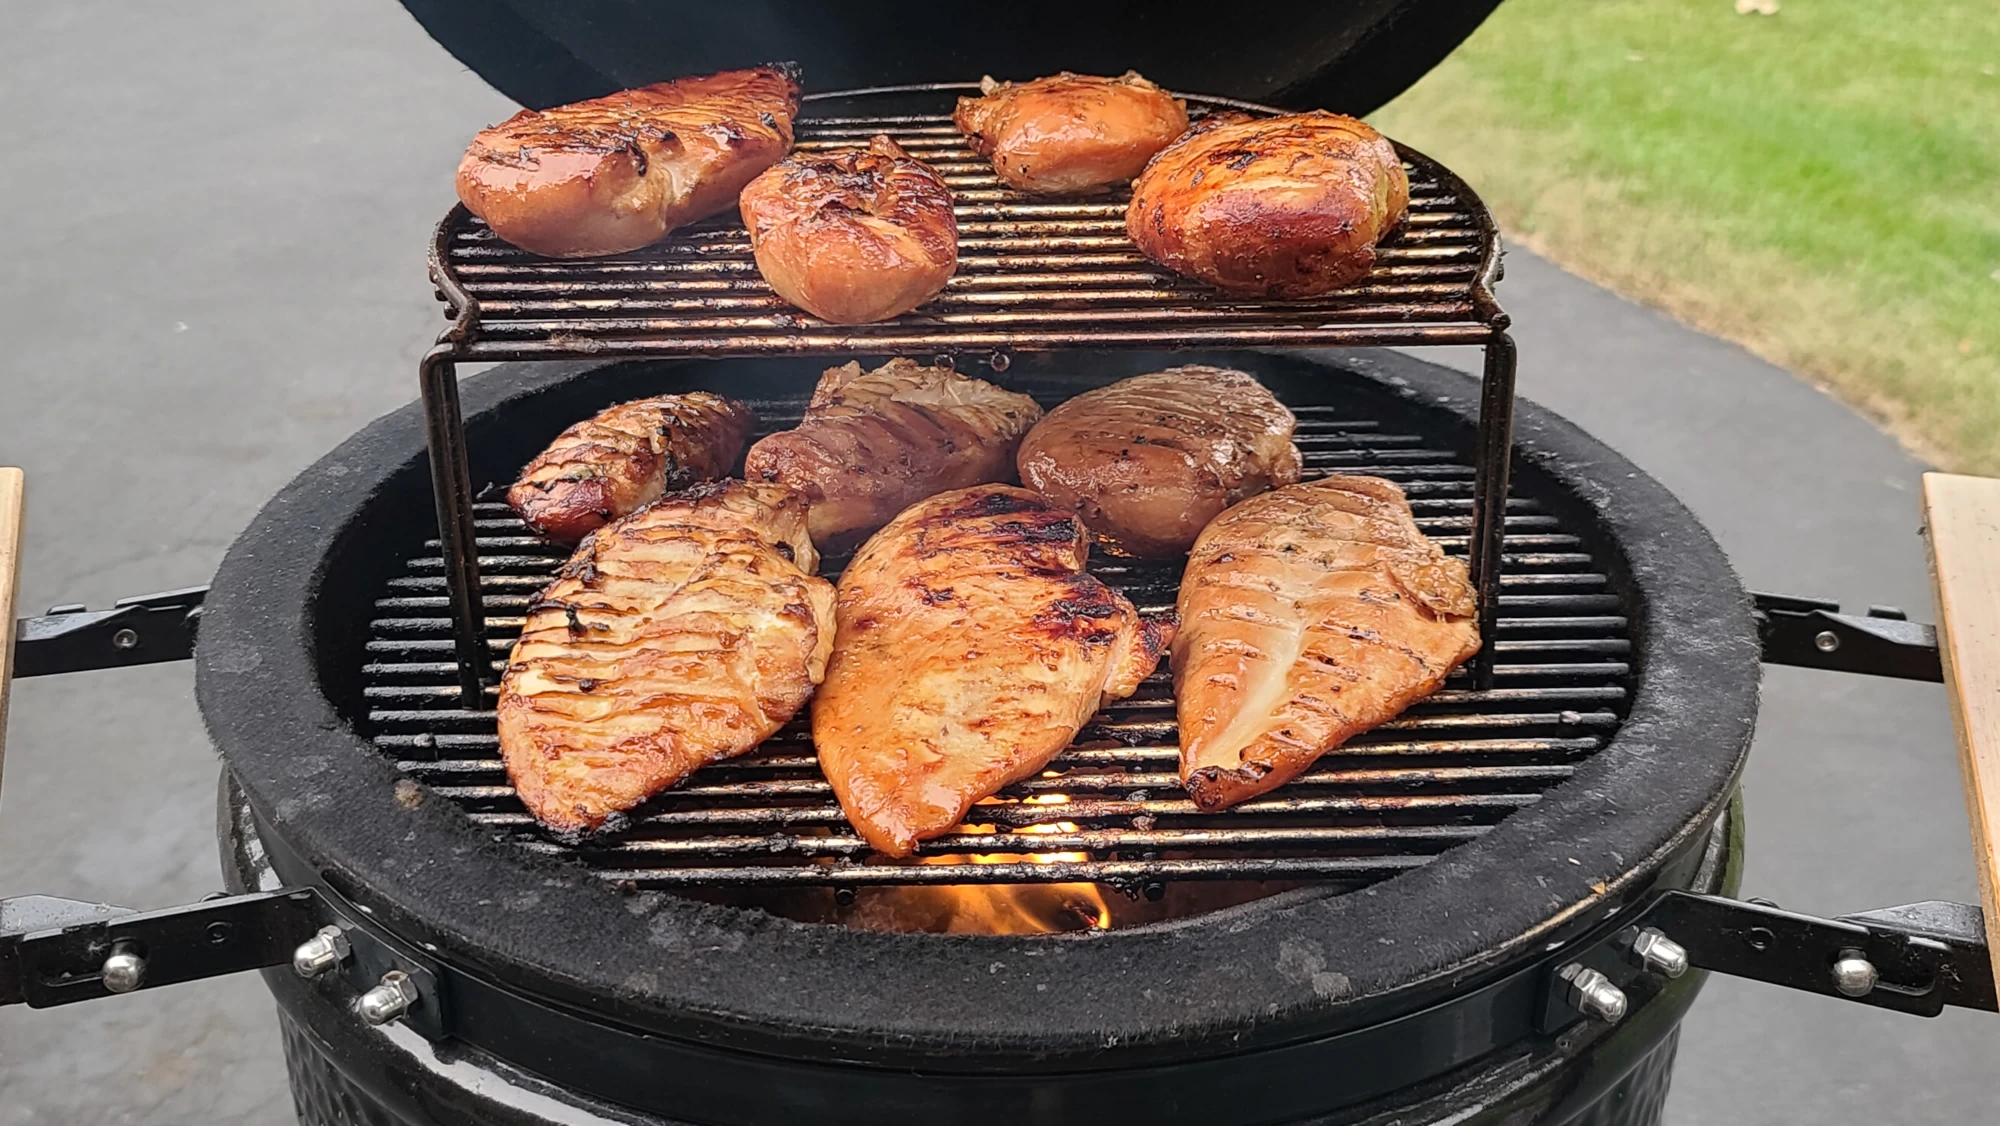 Ten chicken breasts of various sizes are cooking on a Medium Saffire kamado, six on the Primary Cooking Grid, and four on the elevated Secondary Cooking Grid above.